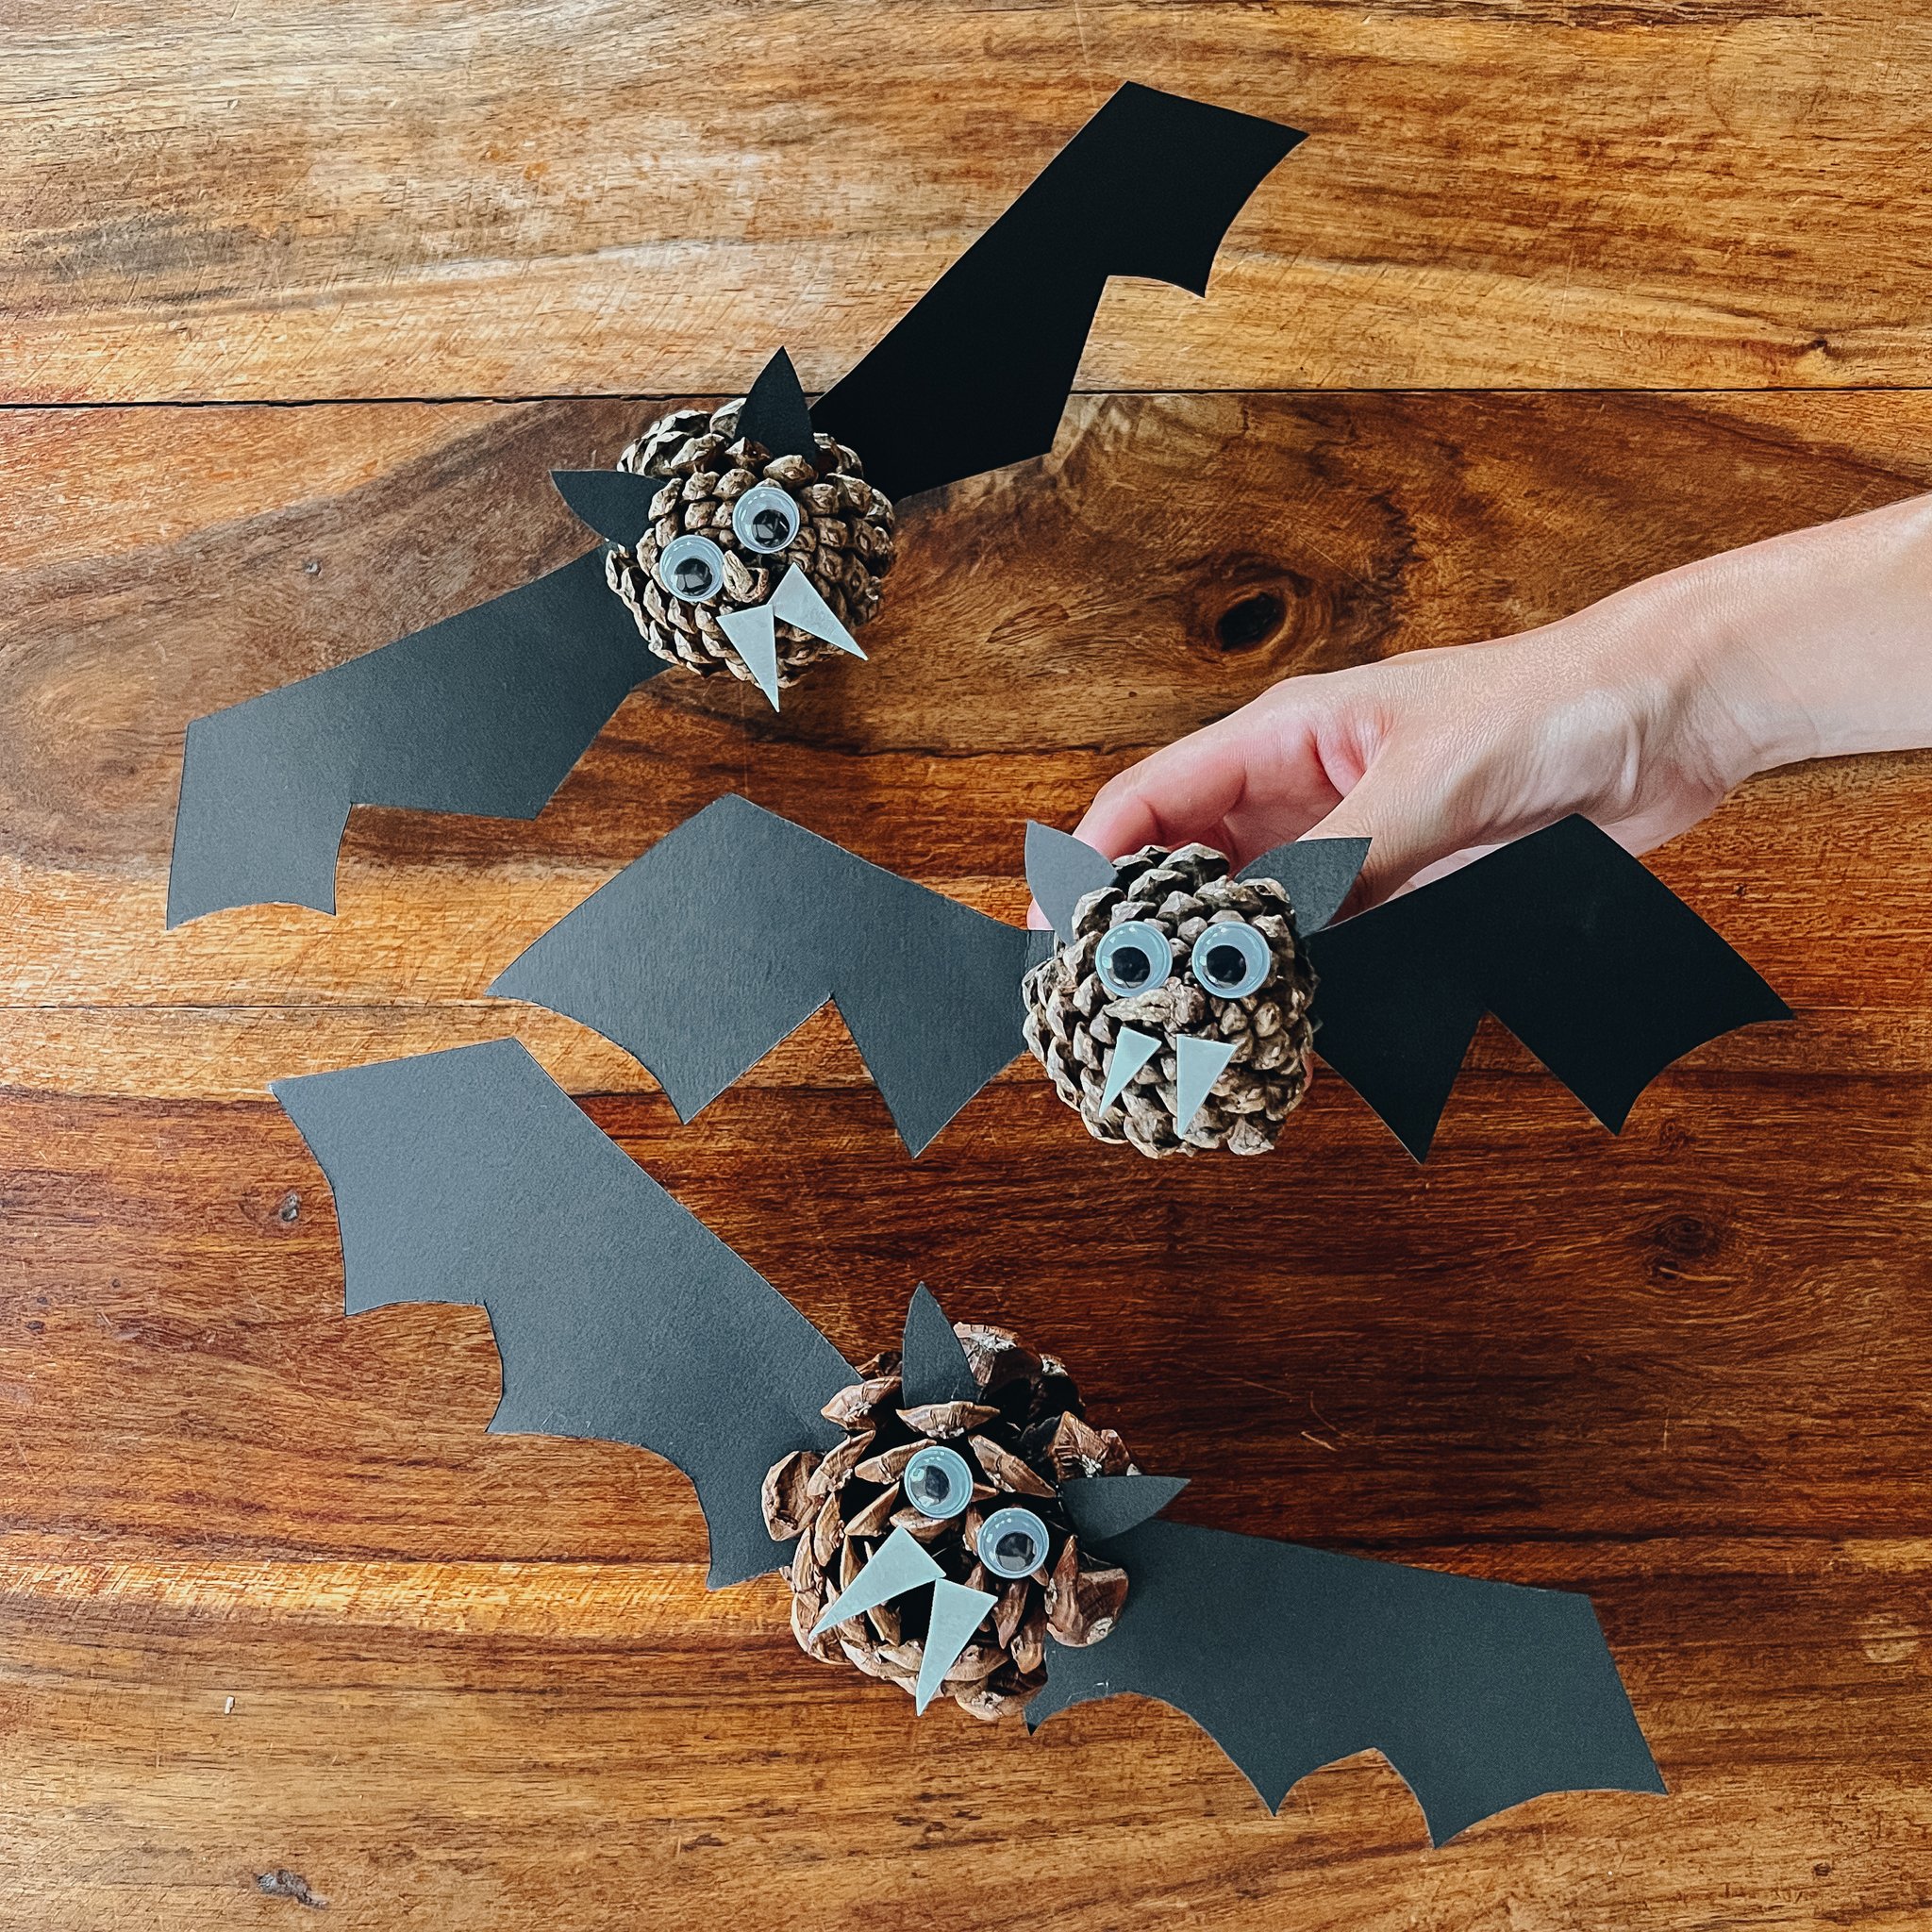 Adorable Pinecone Bat Craft Your Kids Will Enjoy Creating This